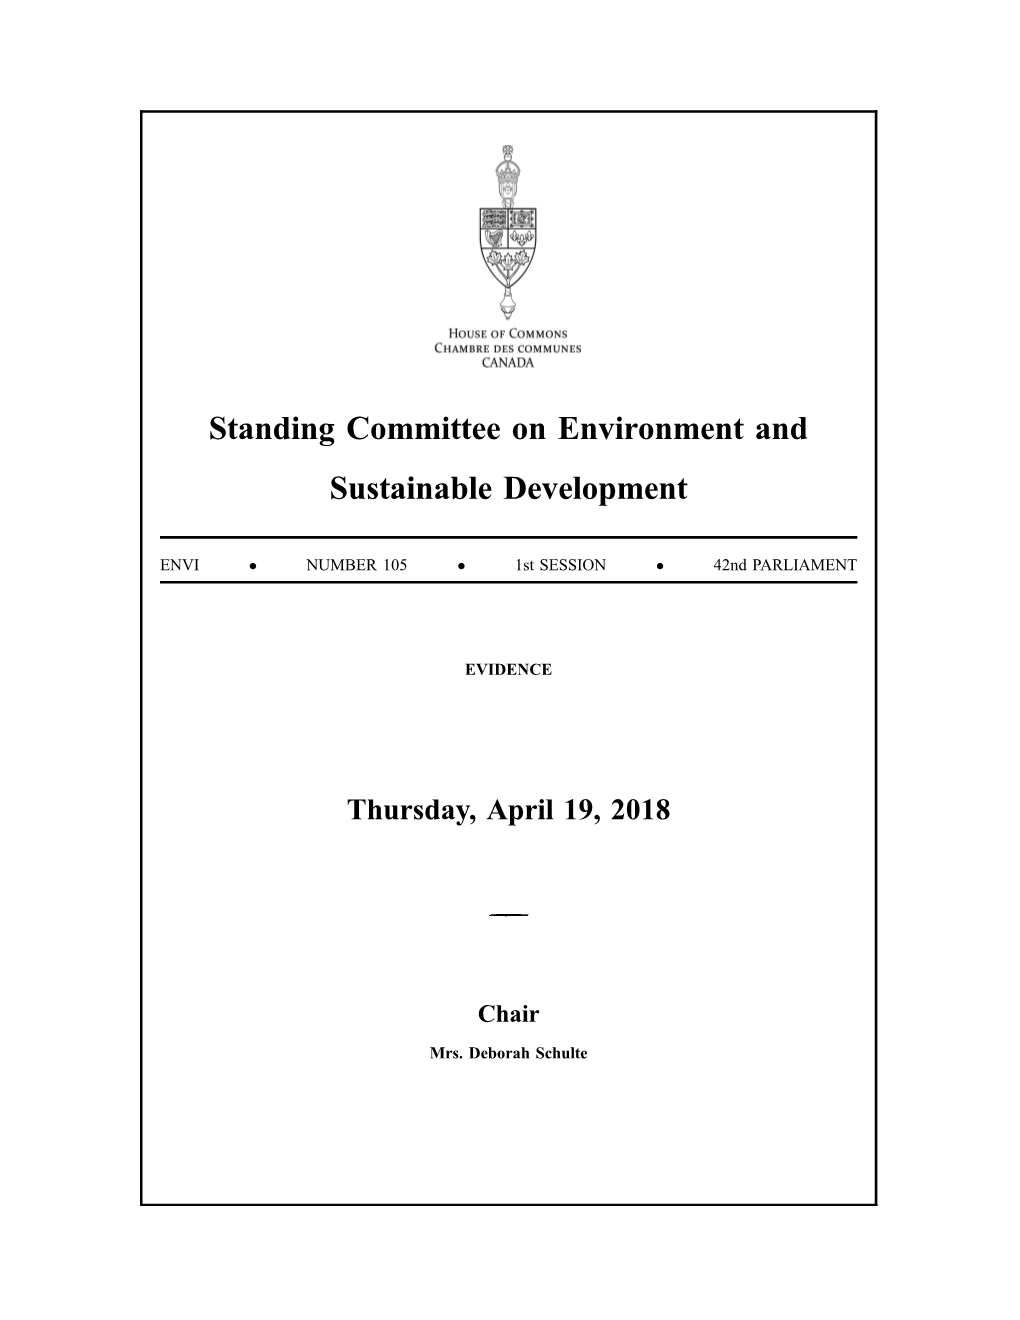 Standing Committee on Environment and Sustainable Development